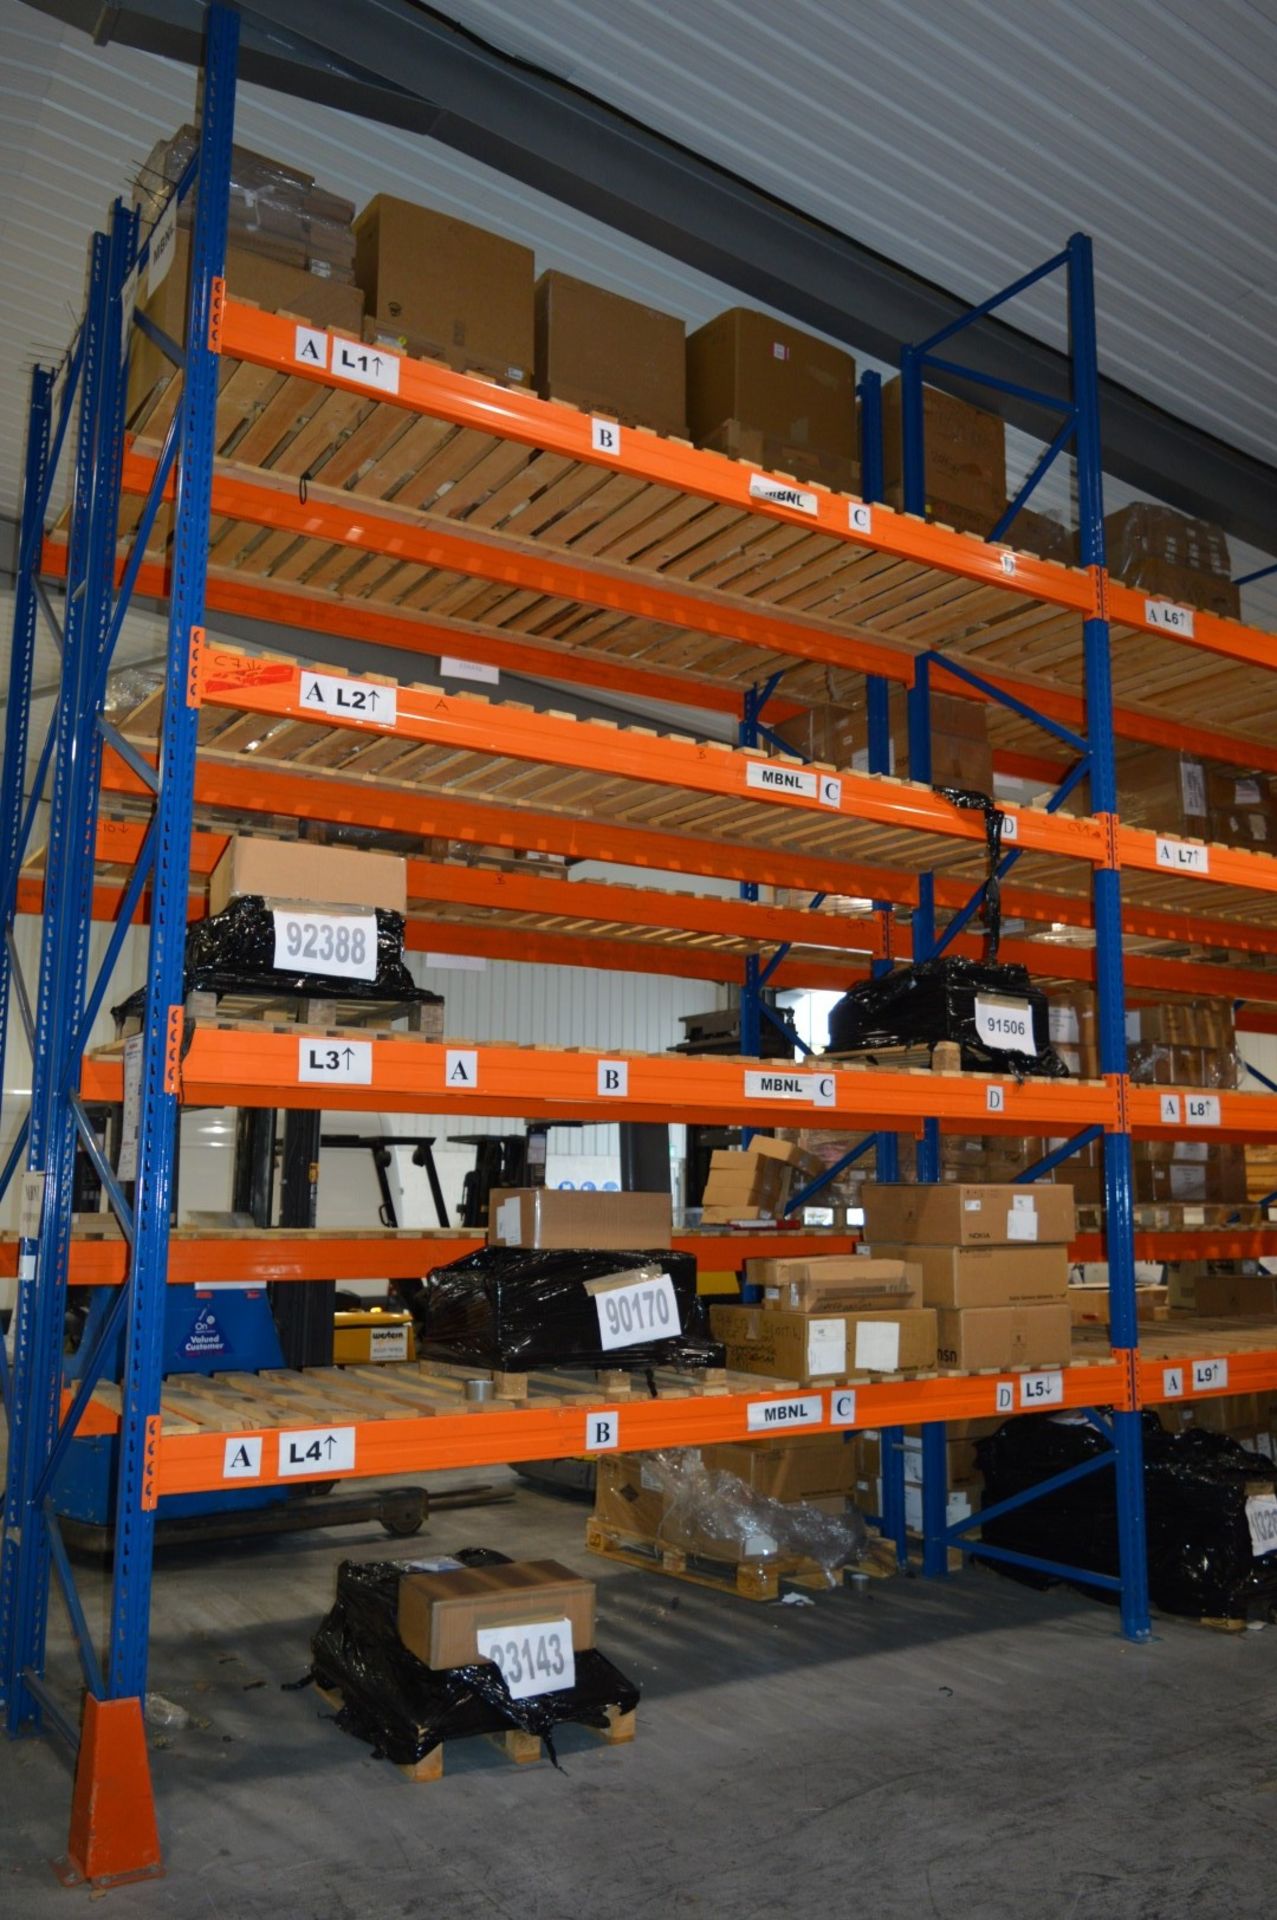 3 x Bays of Warehouse PALLET RACKING - Lot Includes 4 x Uprights, 24 x Crossbeams, 1 x Corner - Image 3 of 6